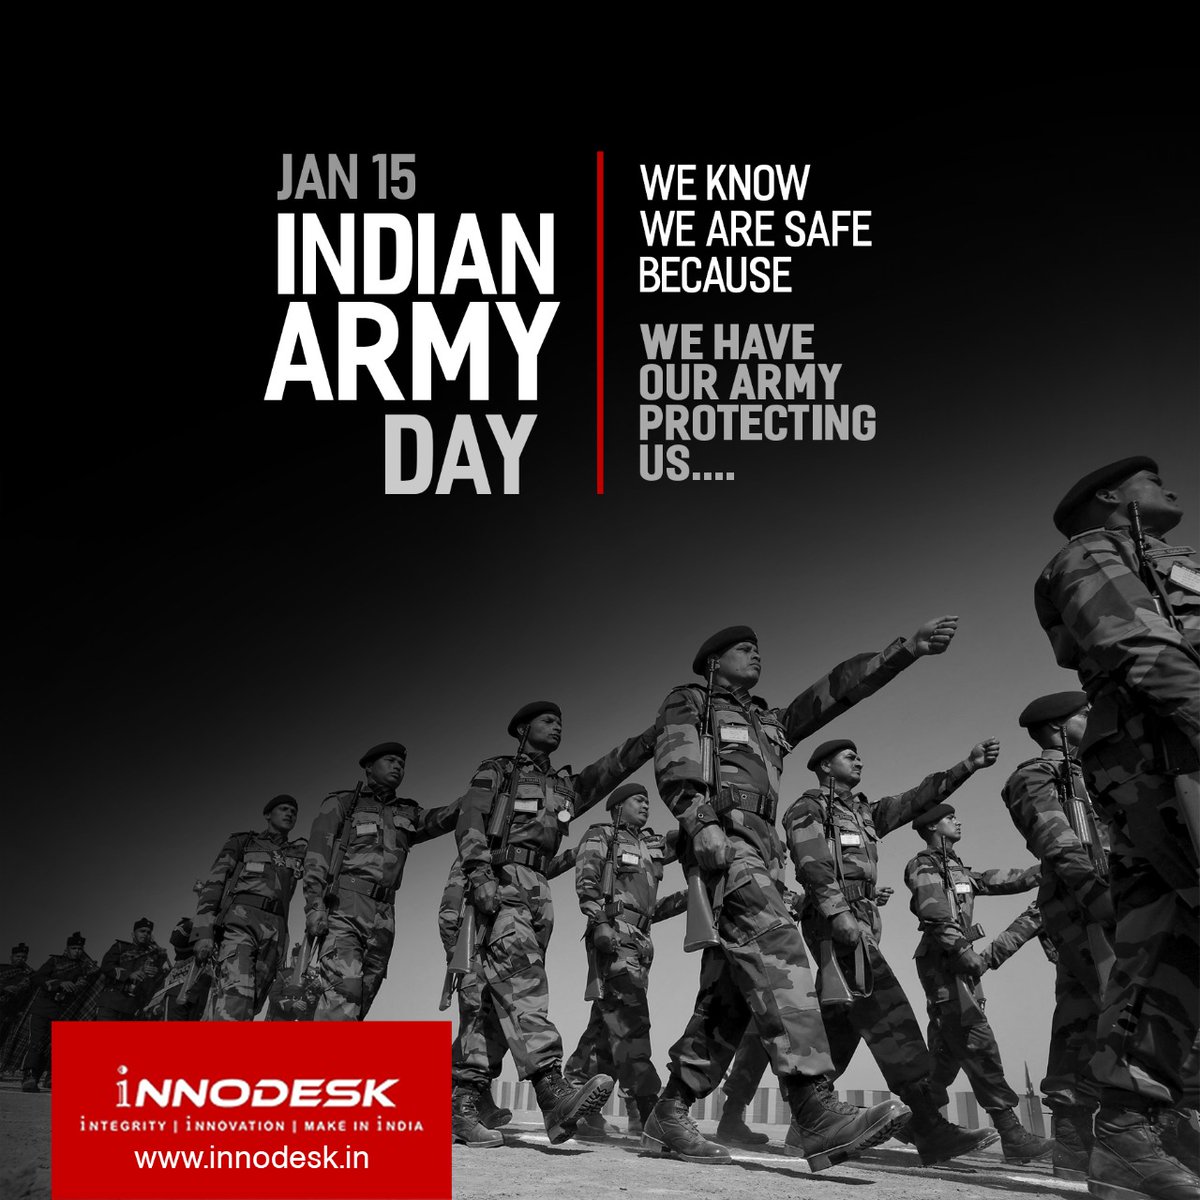 Let's honour the brave humans of India on this army day

#indianarmyday🇮🇳

#innodesk #proudindian #armystrong #soldierlife #jaihind
#armyday2023 #salute #indiansoldiers